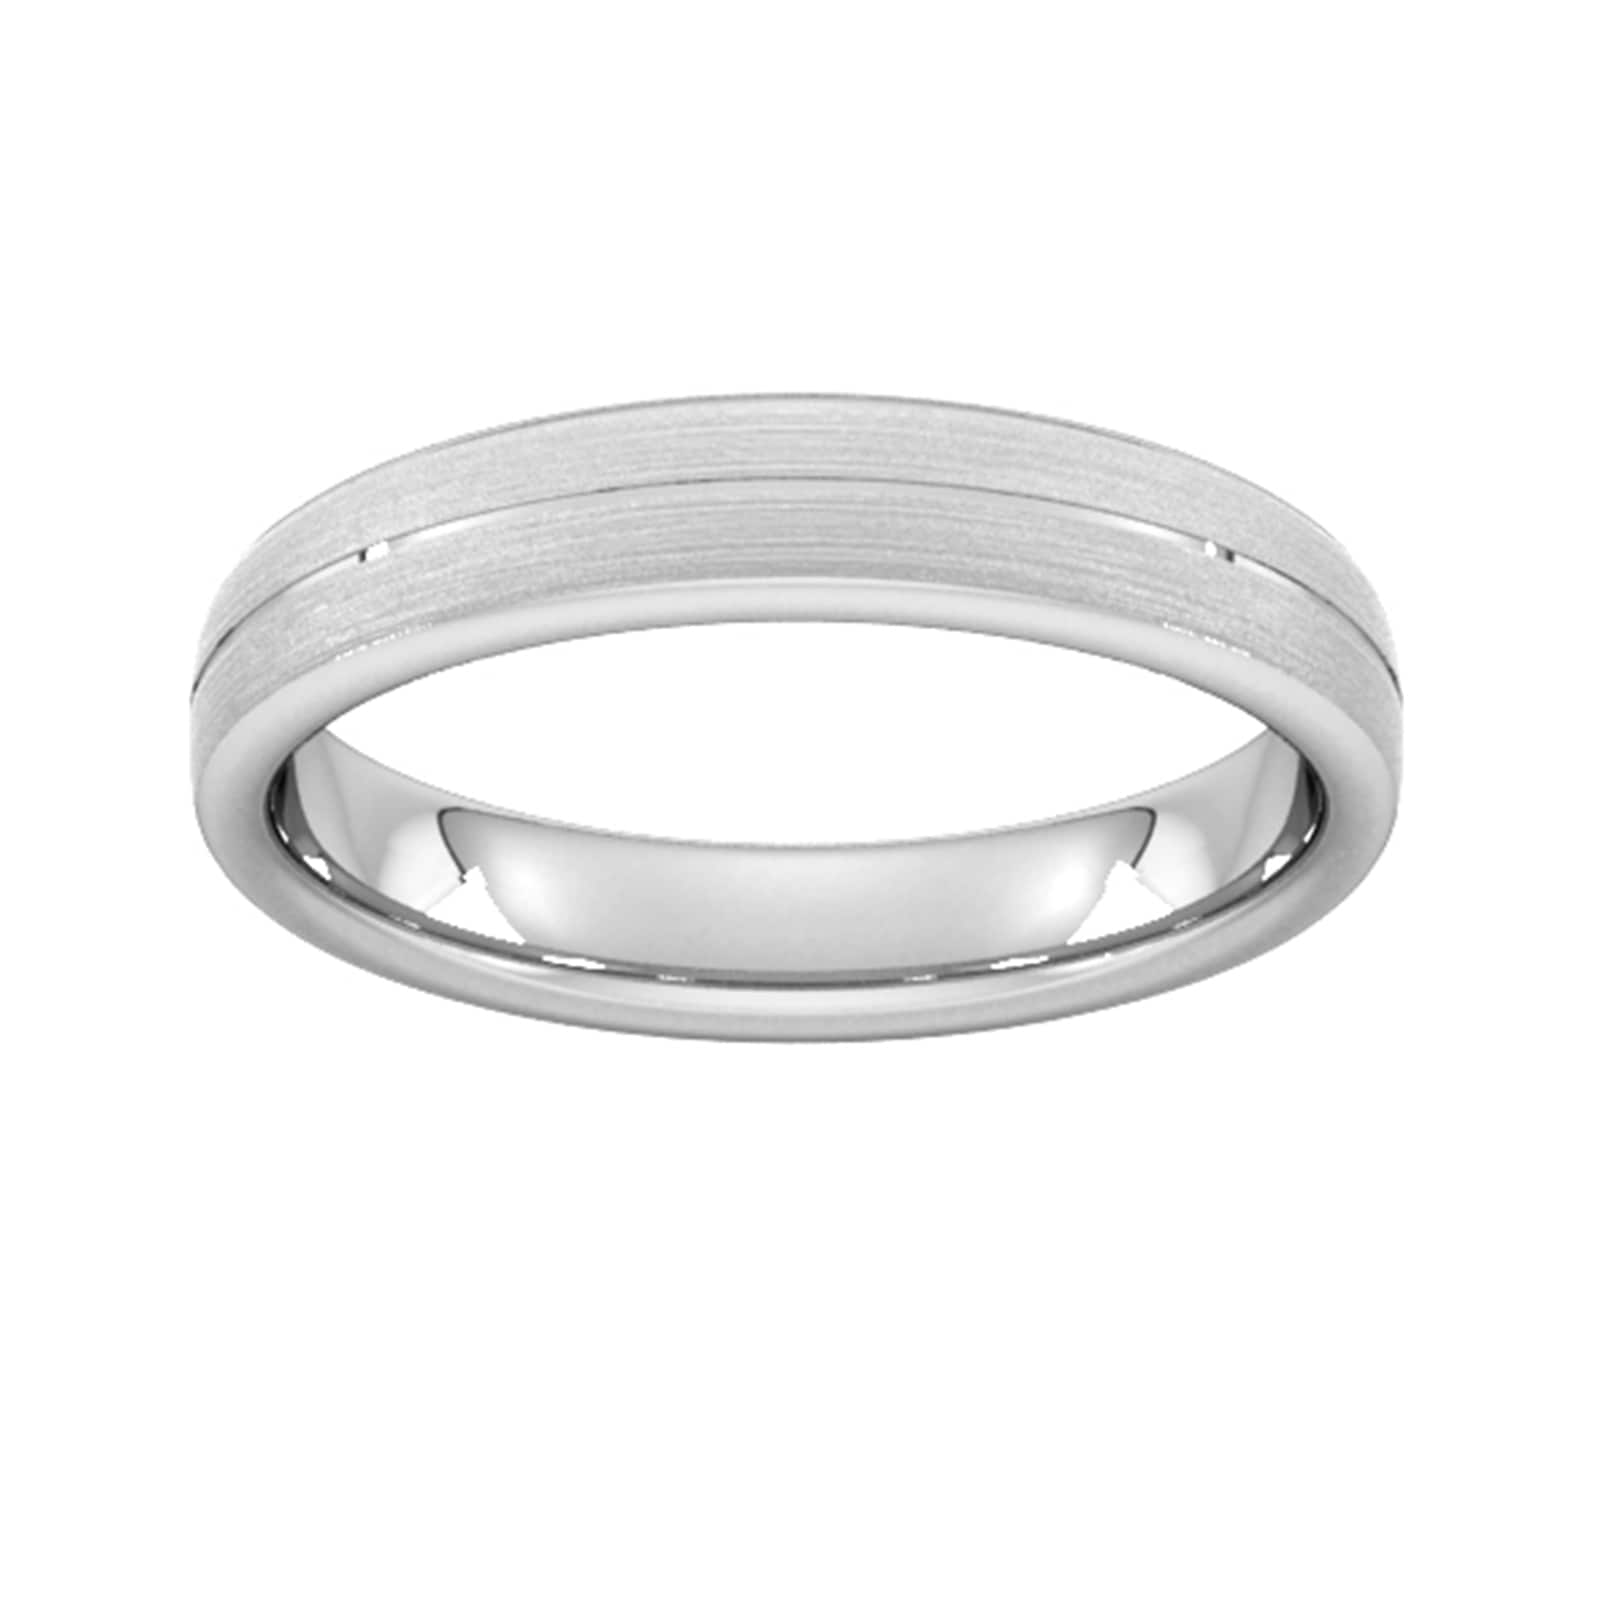 4mm D Shape Standard Centre Groove With Chamfered Edge Wedding Ring In 18 Carat White Gold - Ring Size N